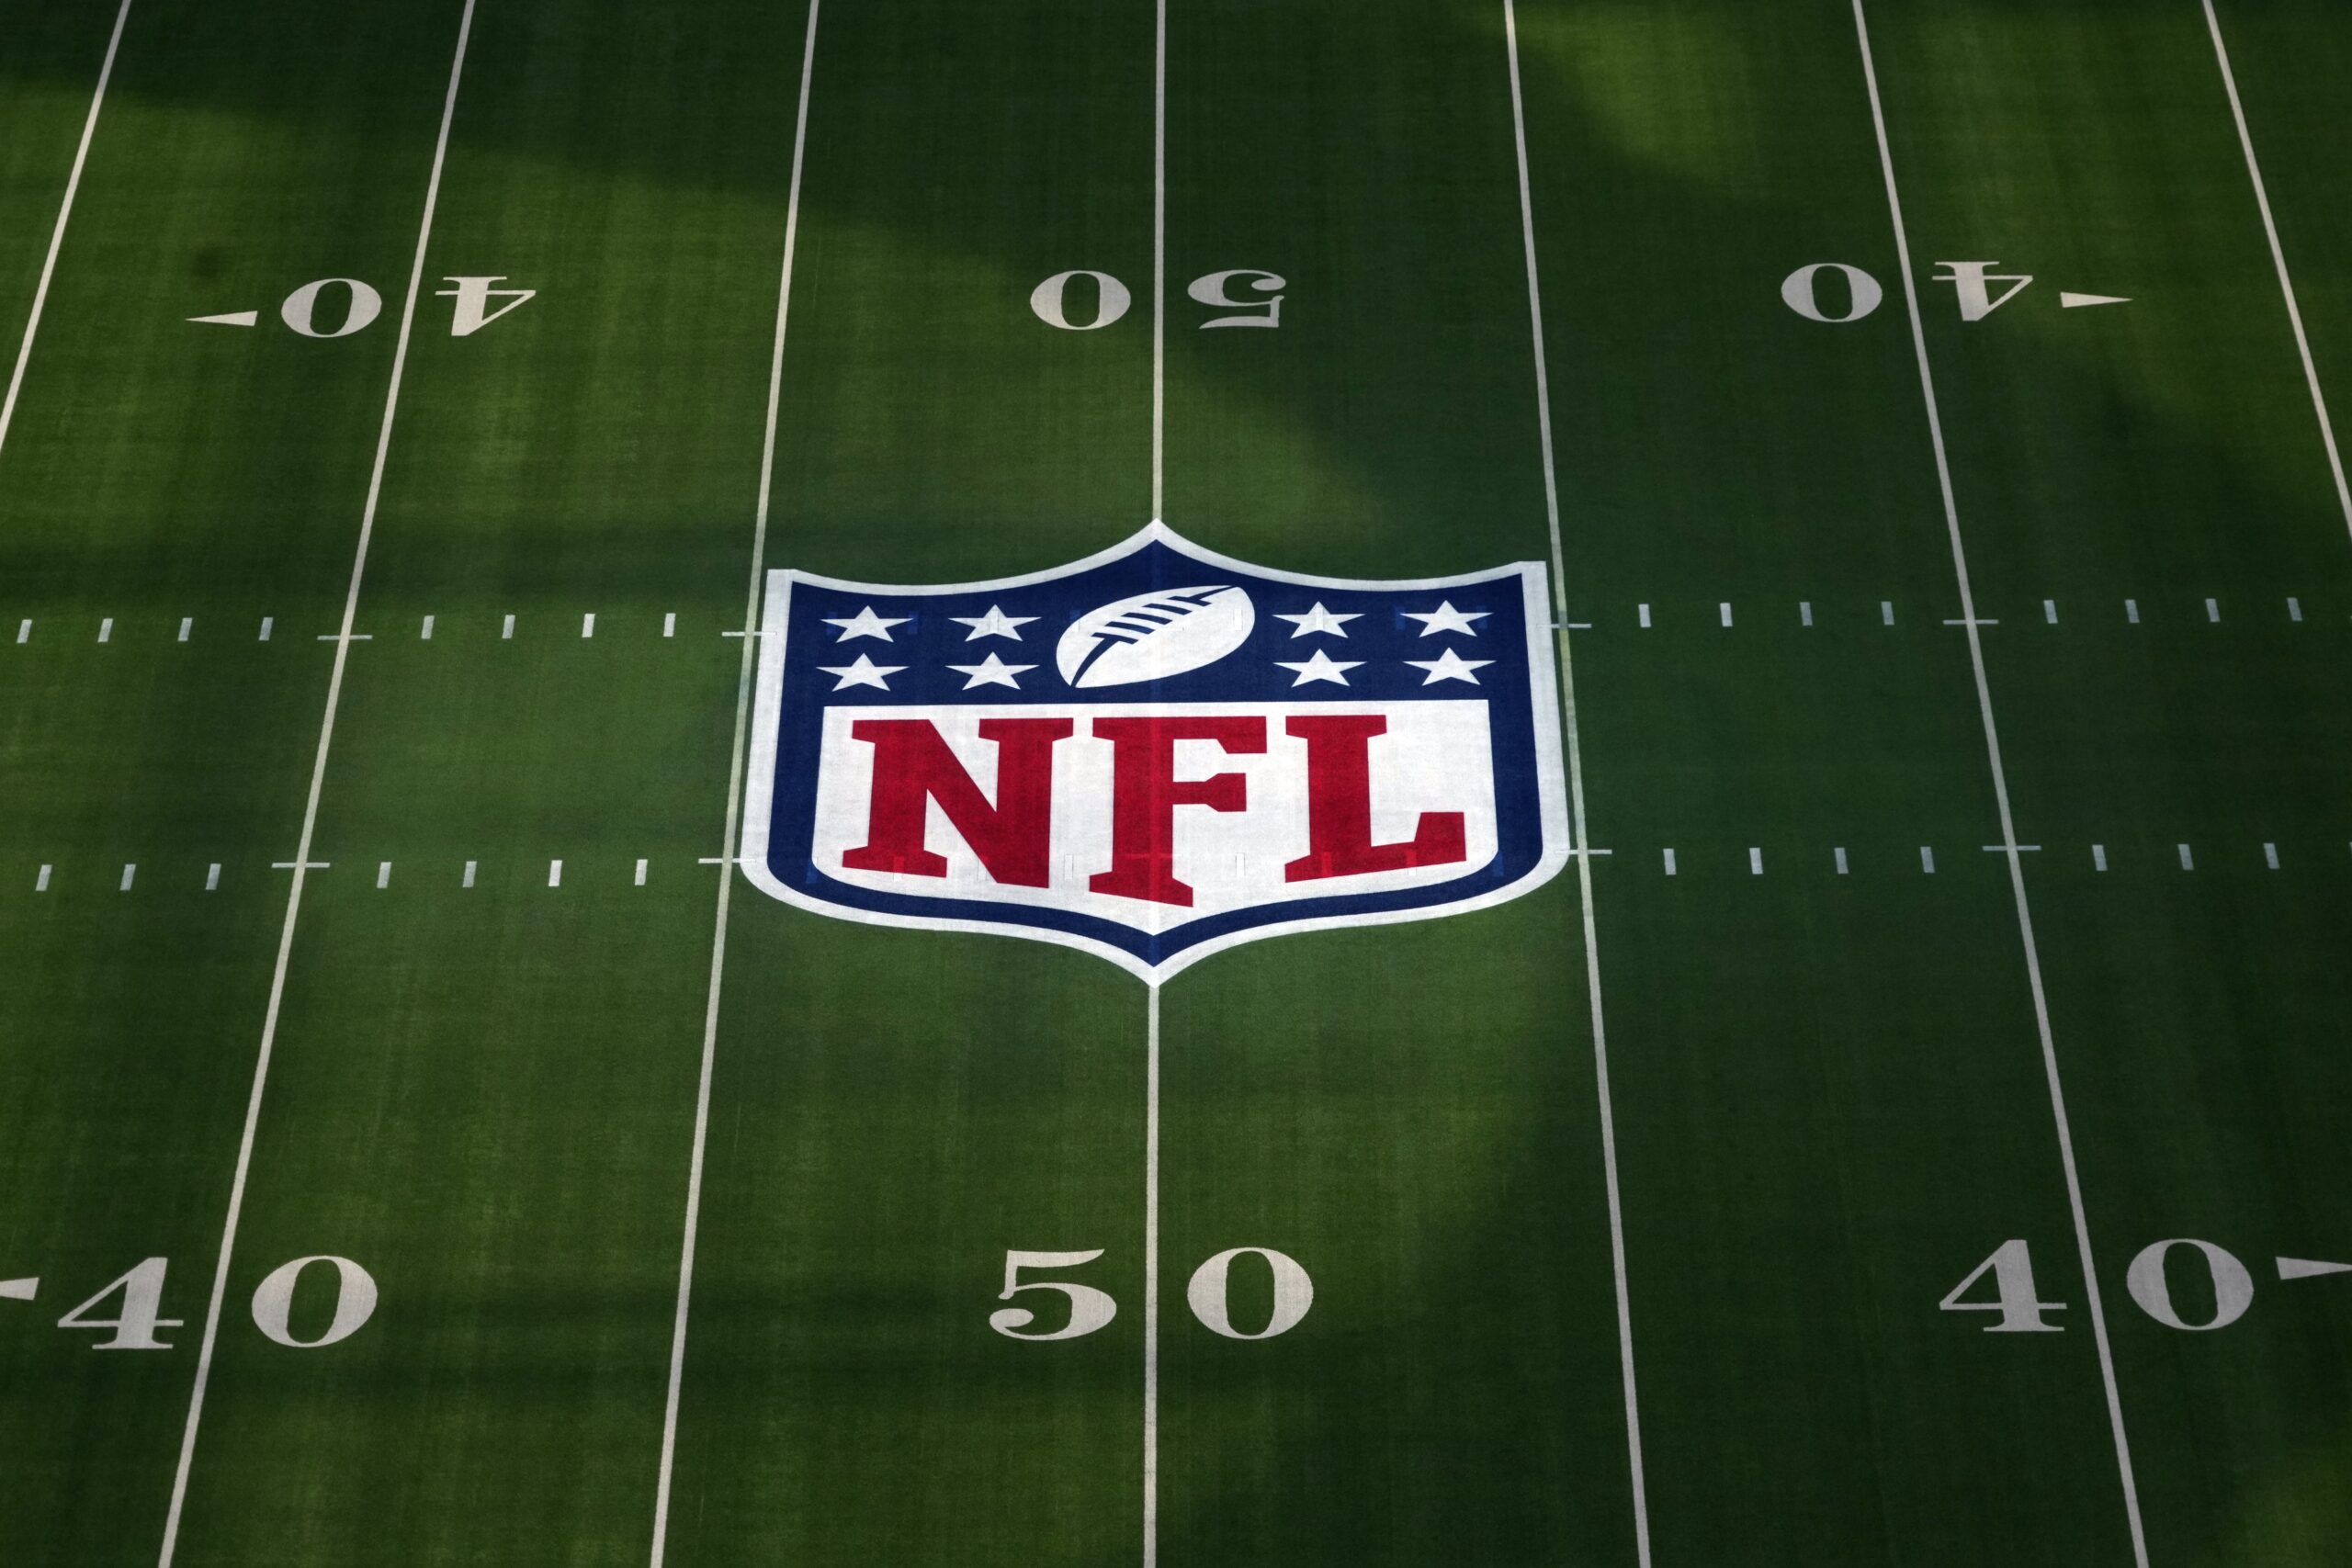 Photo: how many nfl teams play on grass